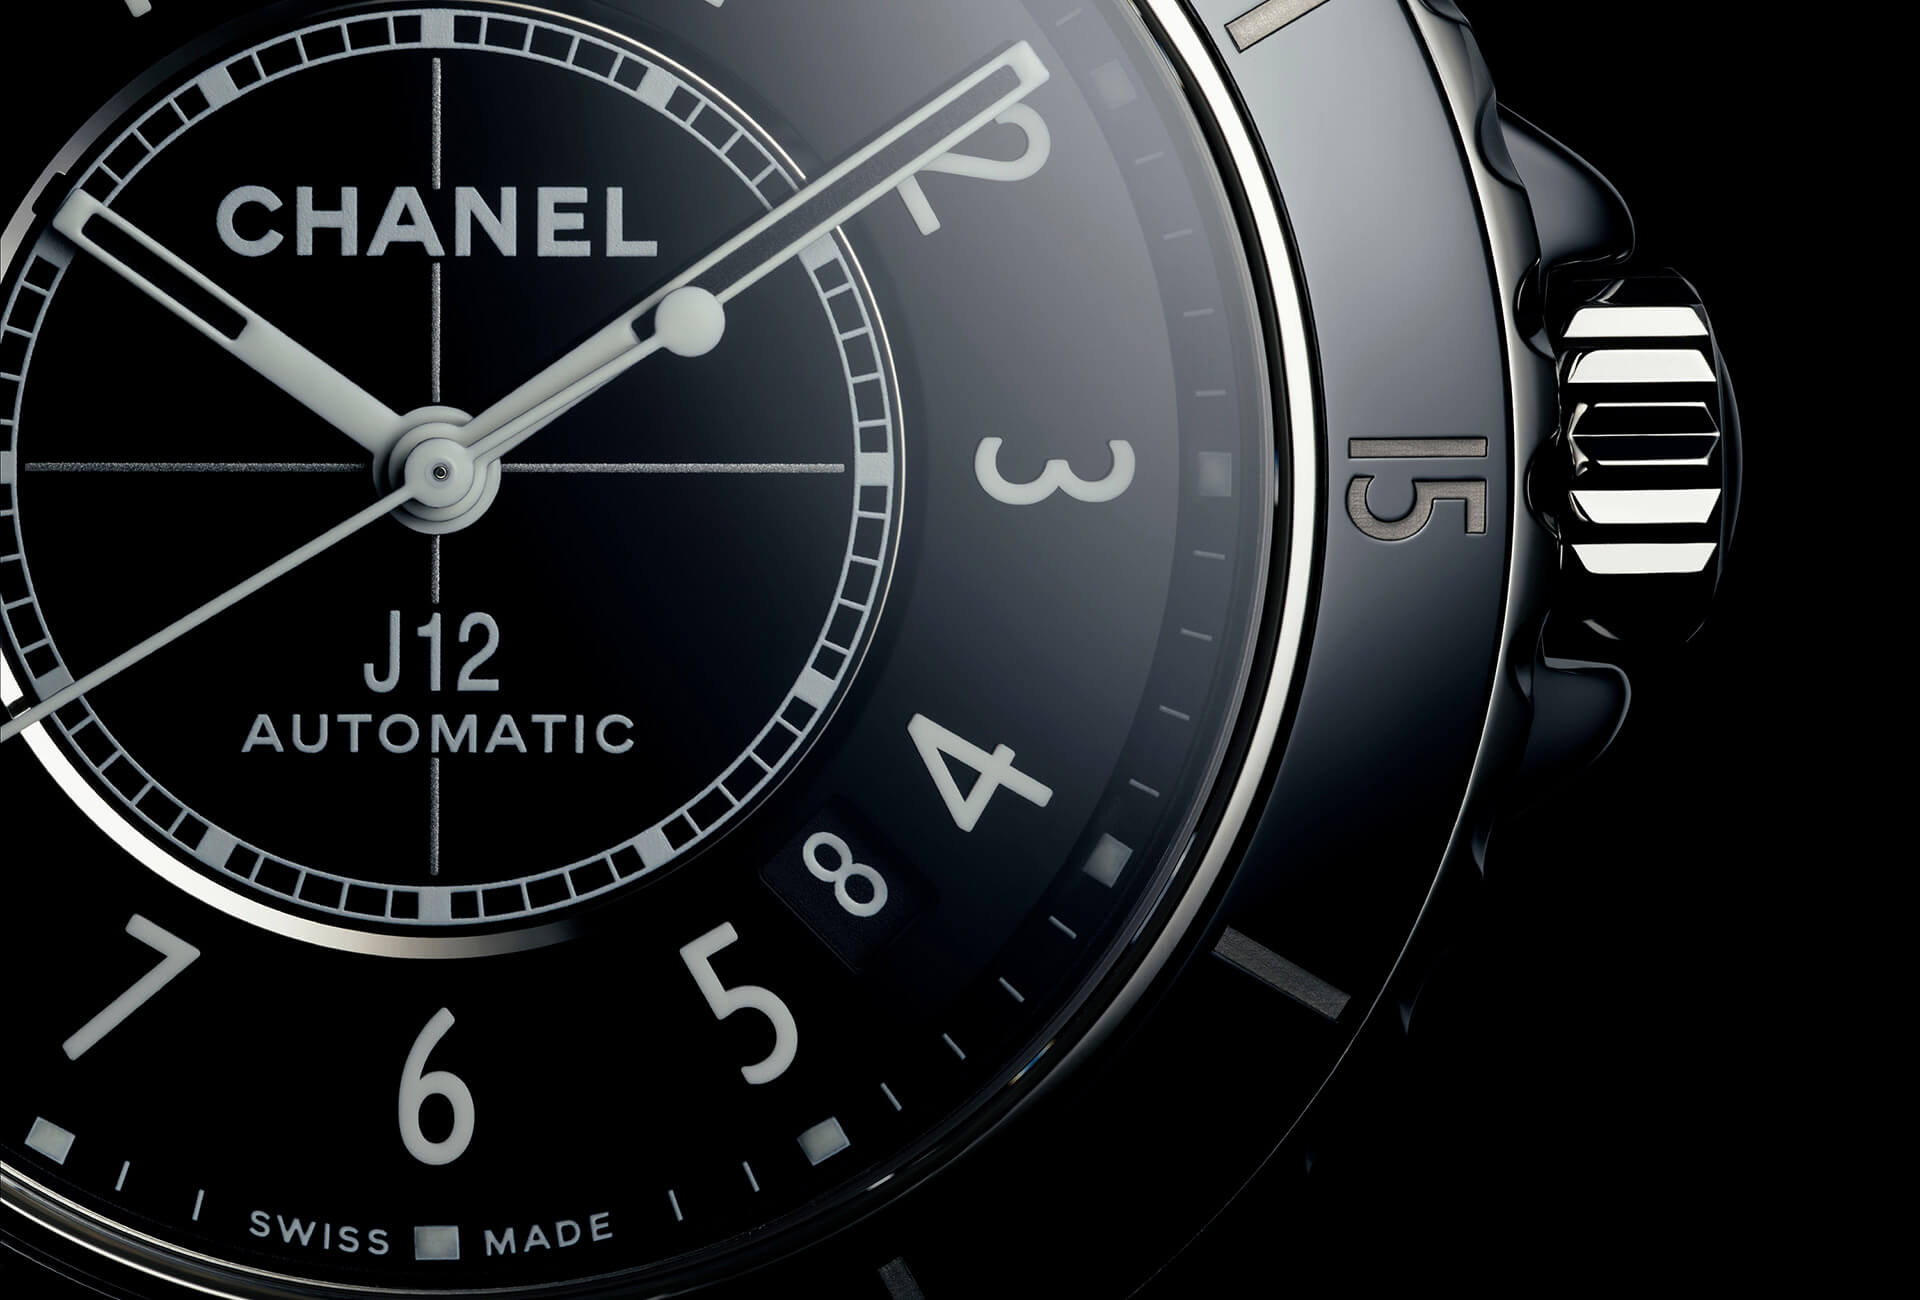 The Chanel J12: same but different